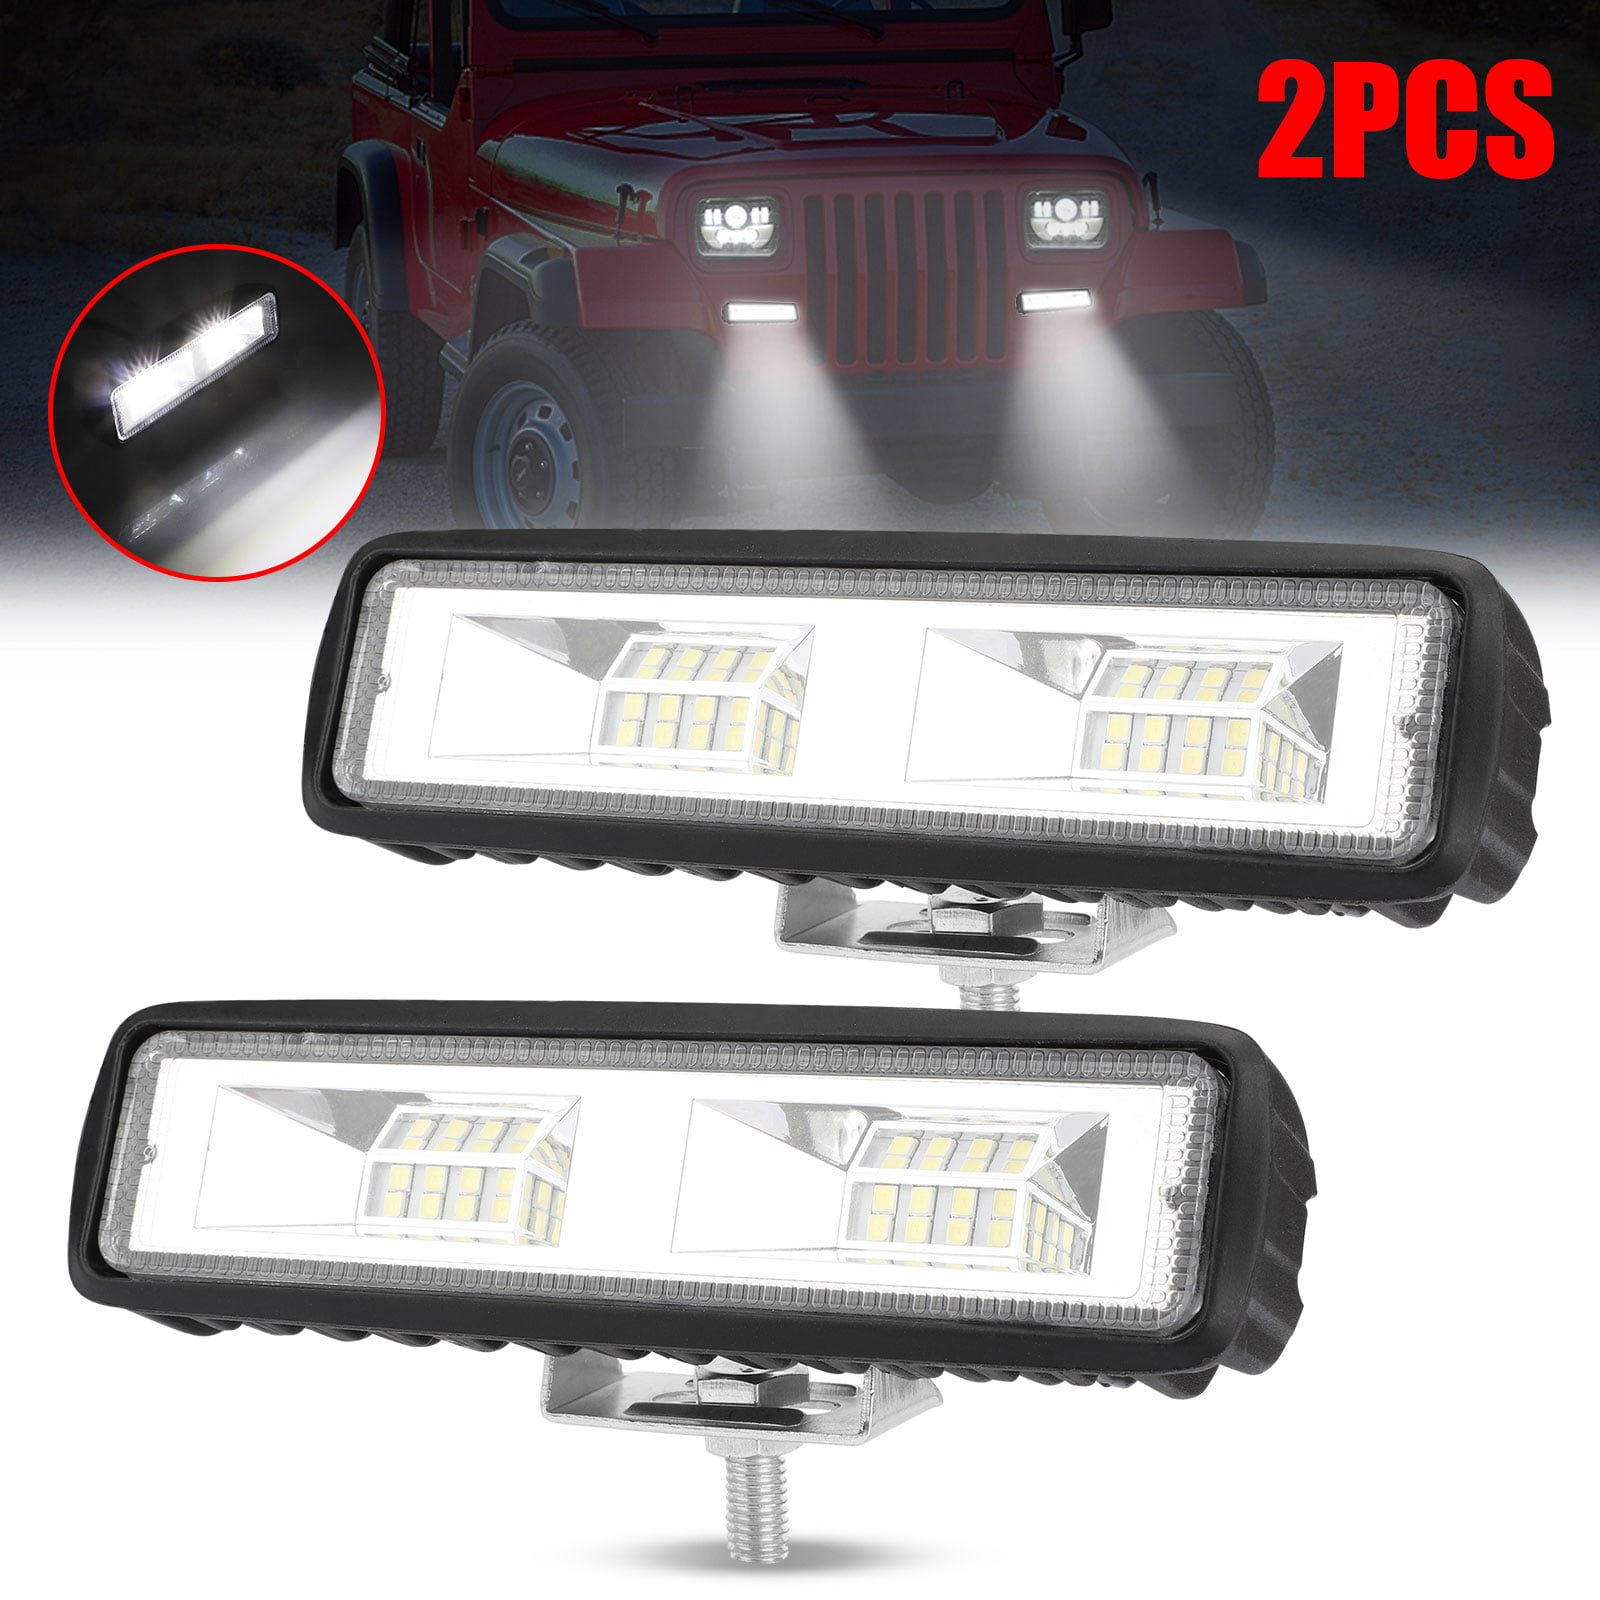 WOWLED 180W 28 Inch CREE LED Offroad Combo Driving Light Bar Work Lamp Truck SUV ATV 4WD Car Jeep Boat 